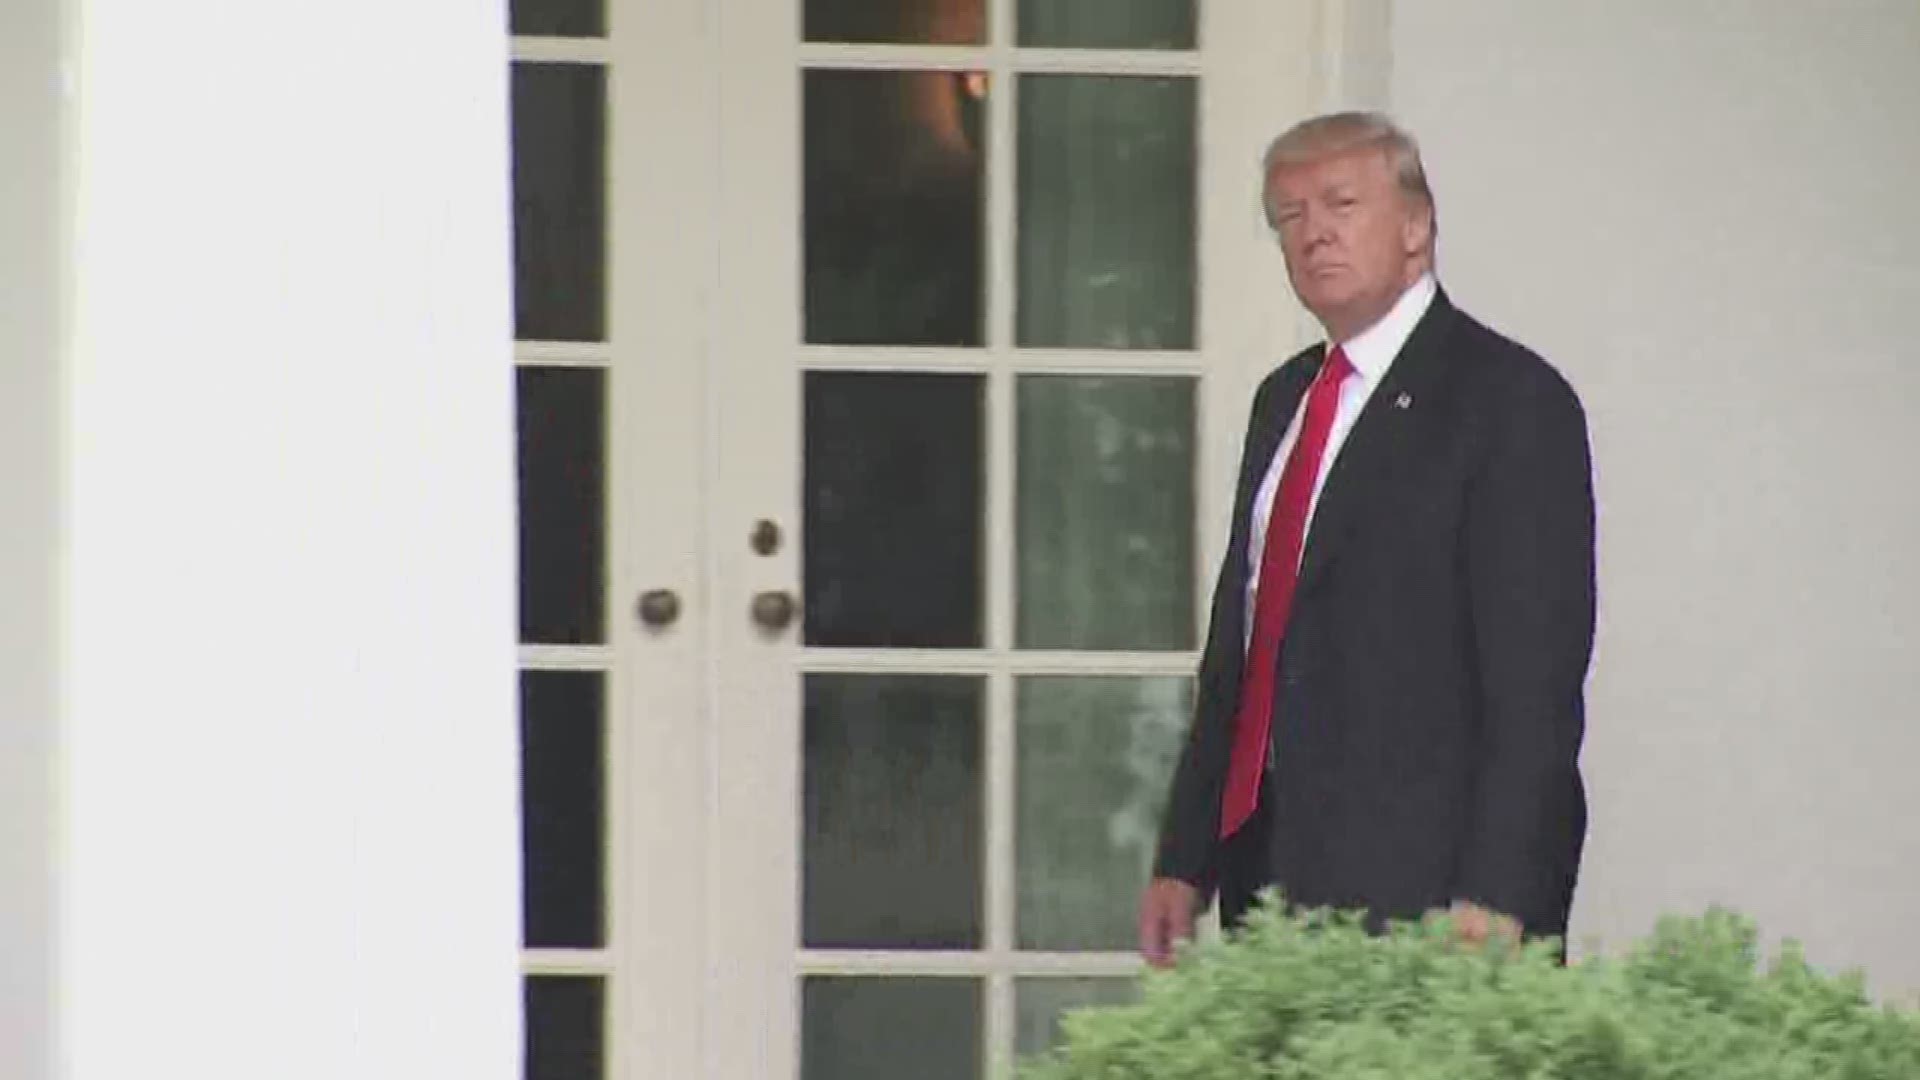 Lawmakers are gearing up for week two of public testimony in the impeachment inquiry of President Trump.